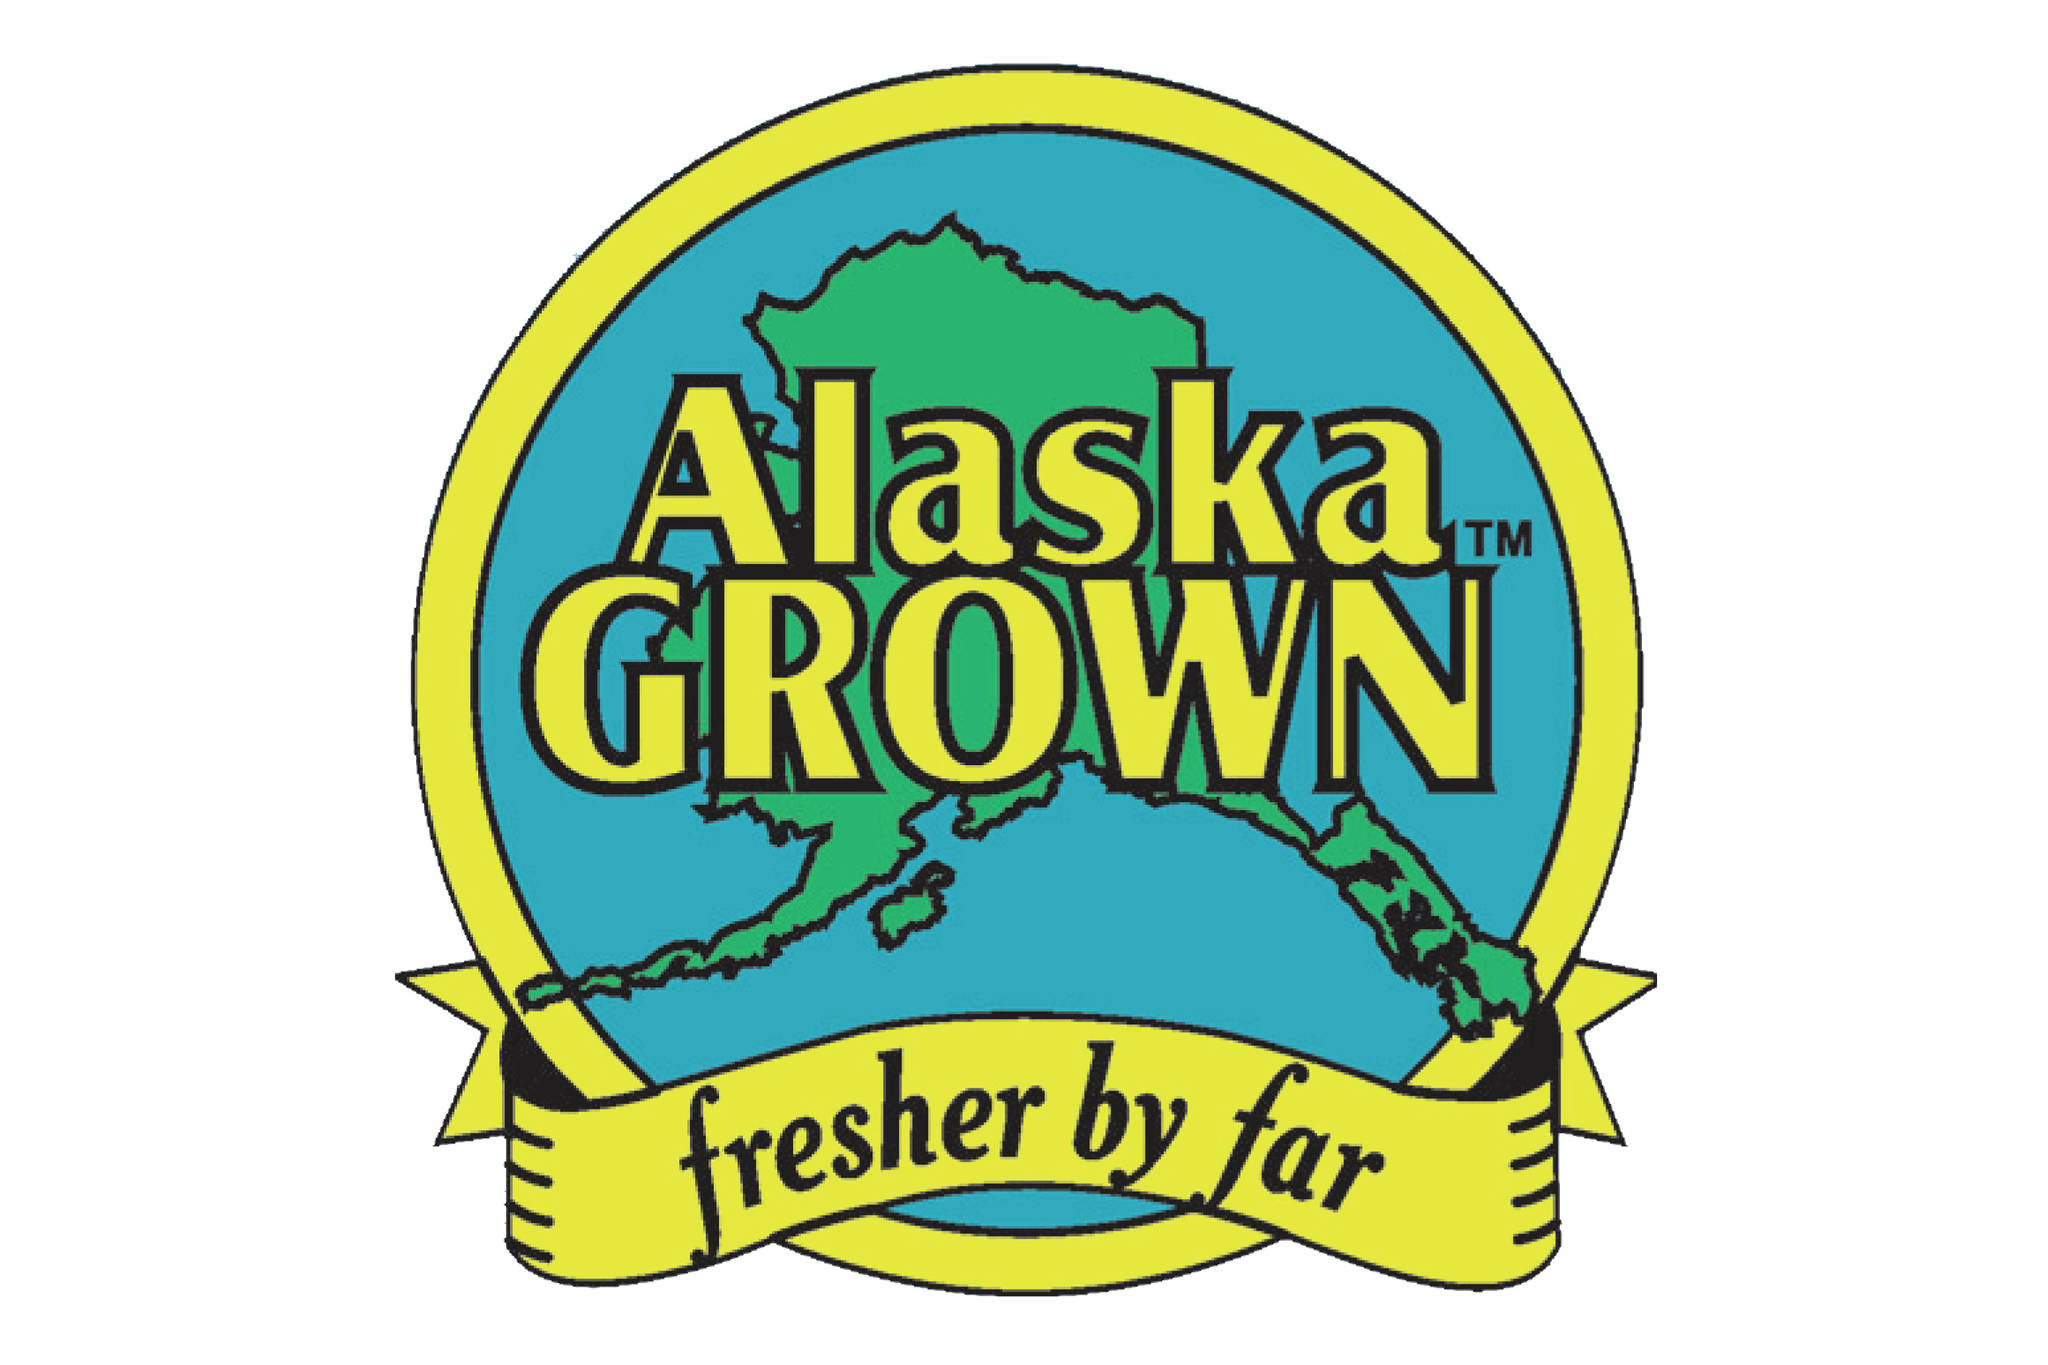 Homer Farmers Market: Try Alaska Food Hub while waiting for market to open